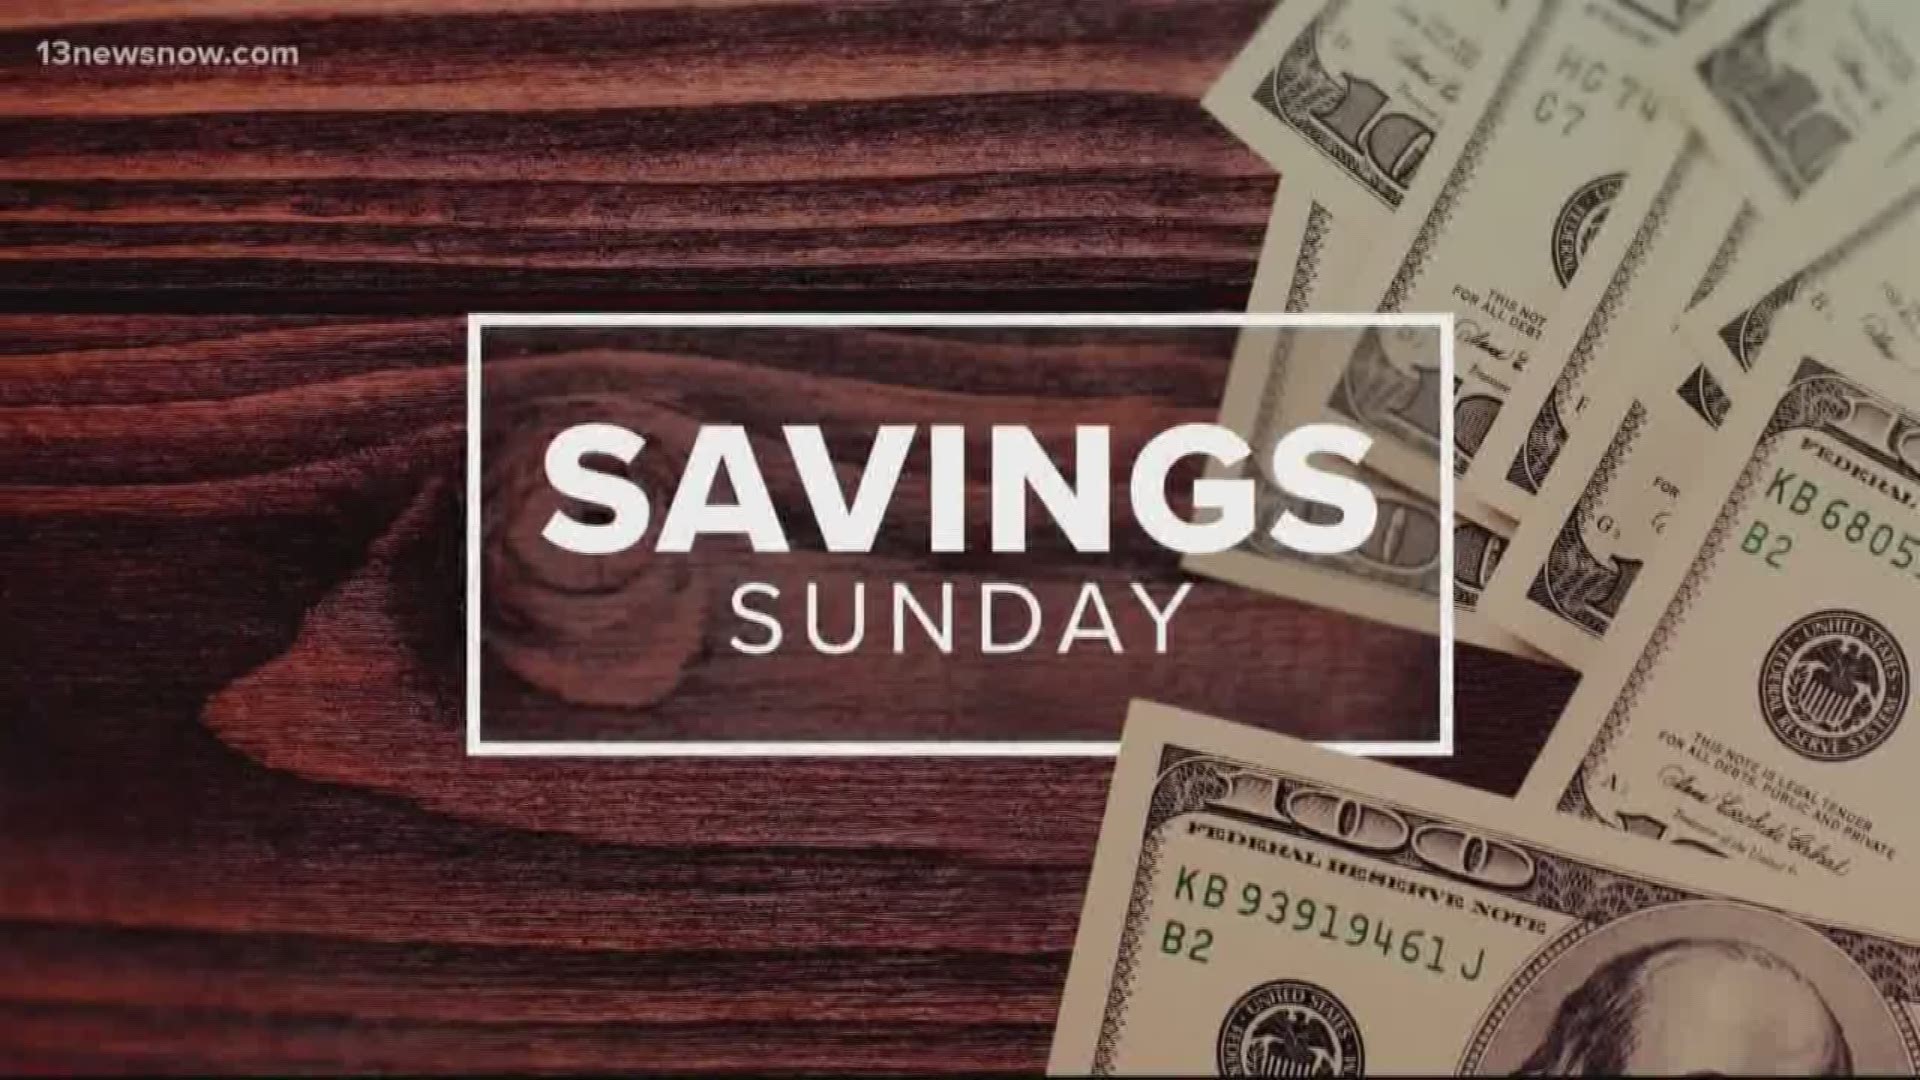 Laura Oliver from www.afrugalchick.com has your big savings for the week of October 13, 2019.